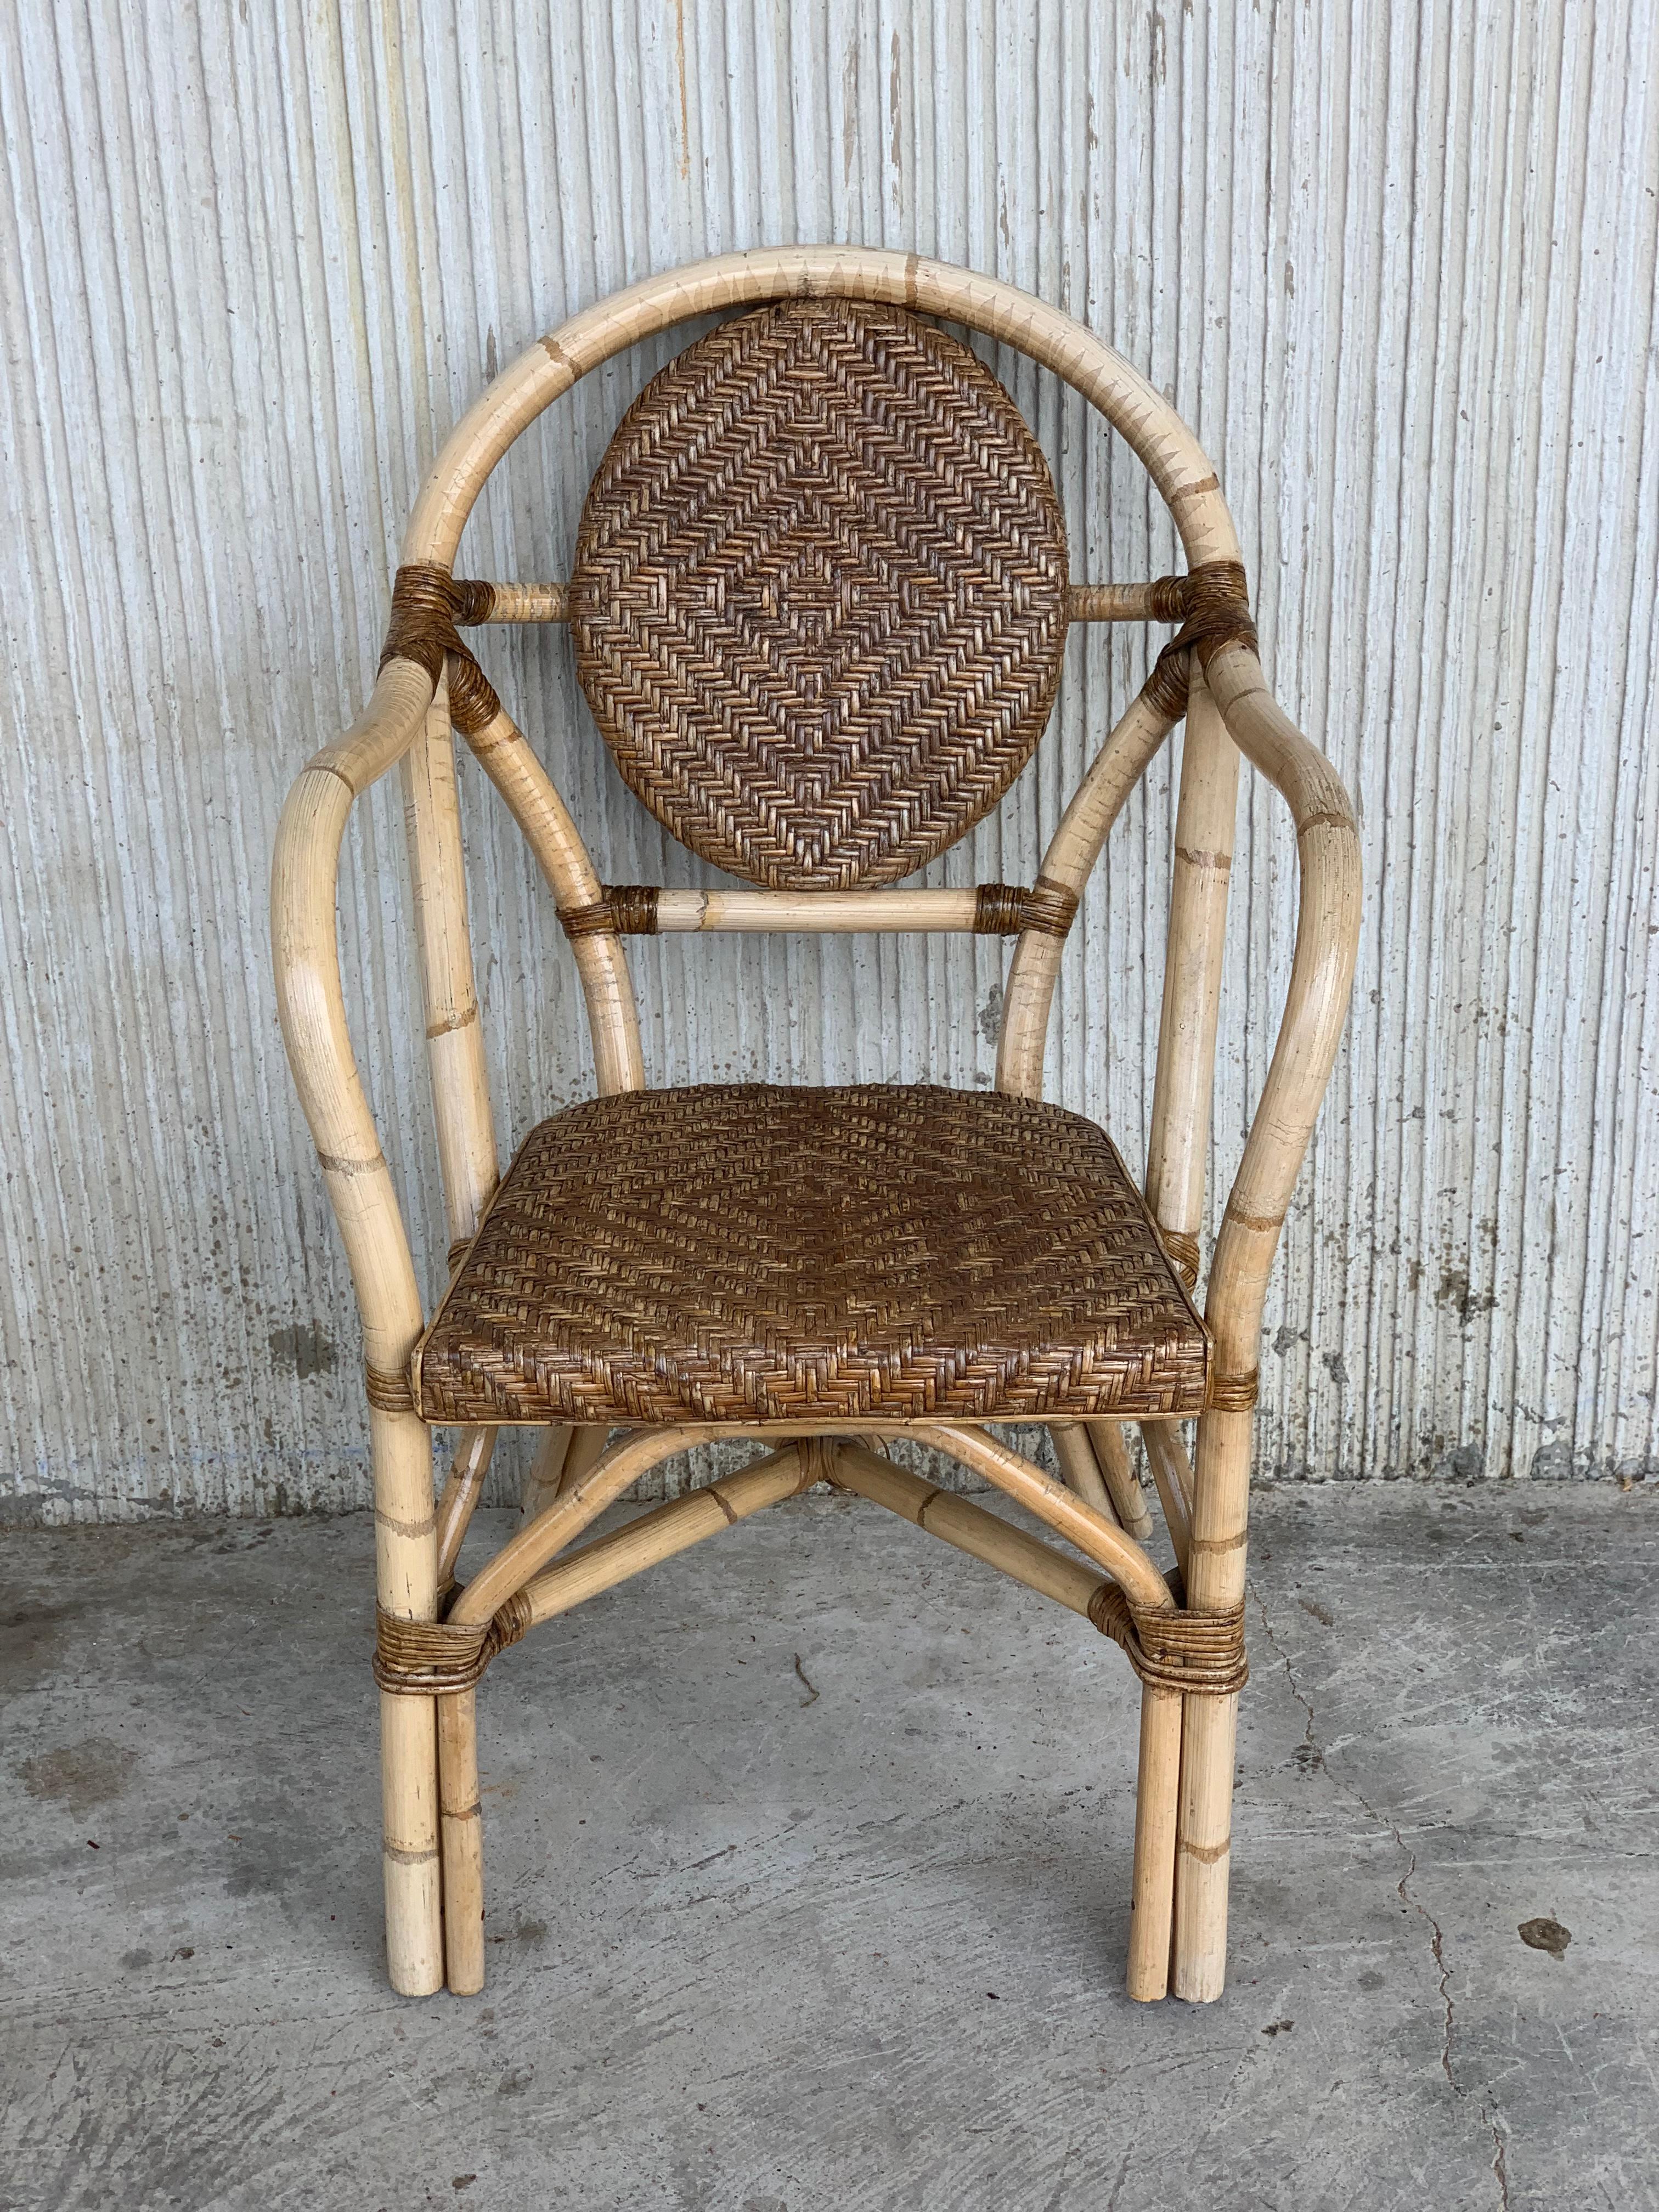 1960s pair of Spanish bamboo armchairs with ovaled back rest
Restored.